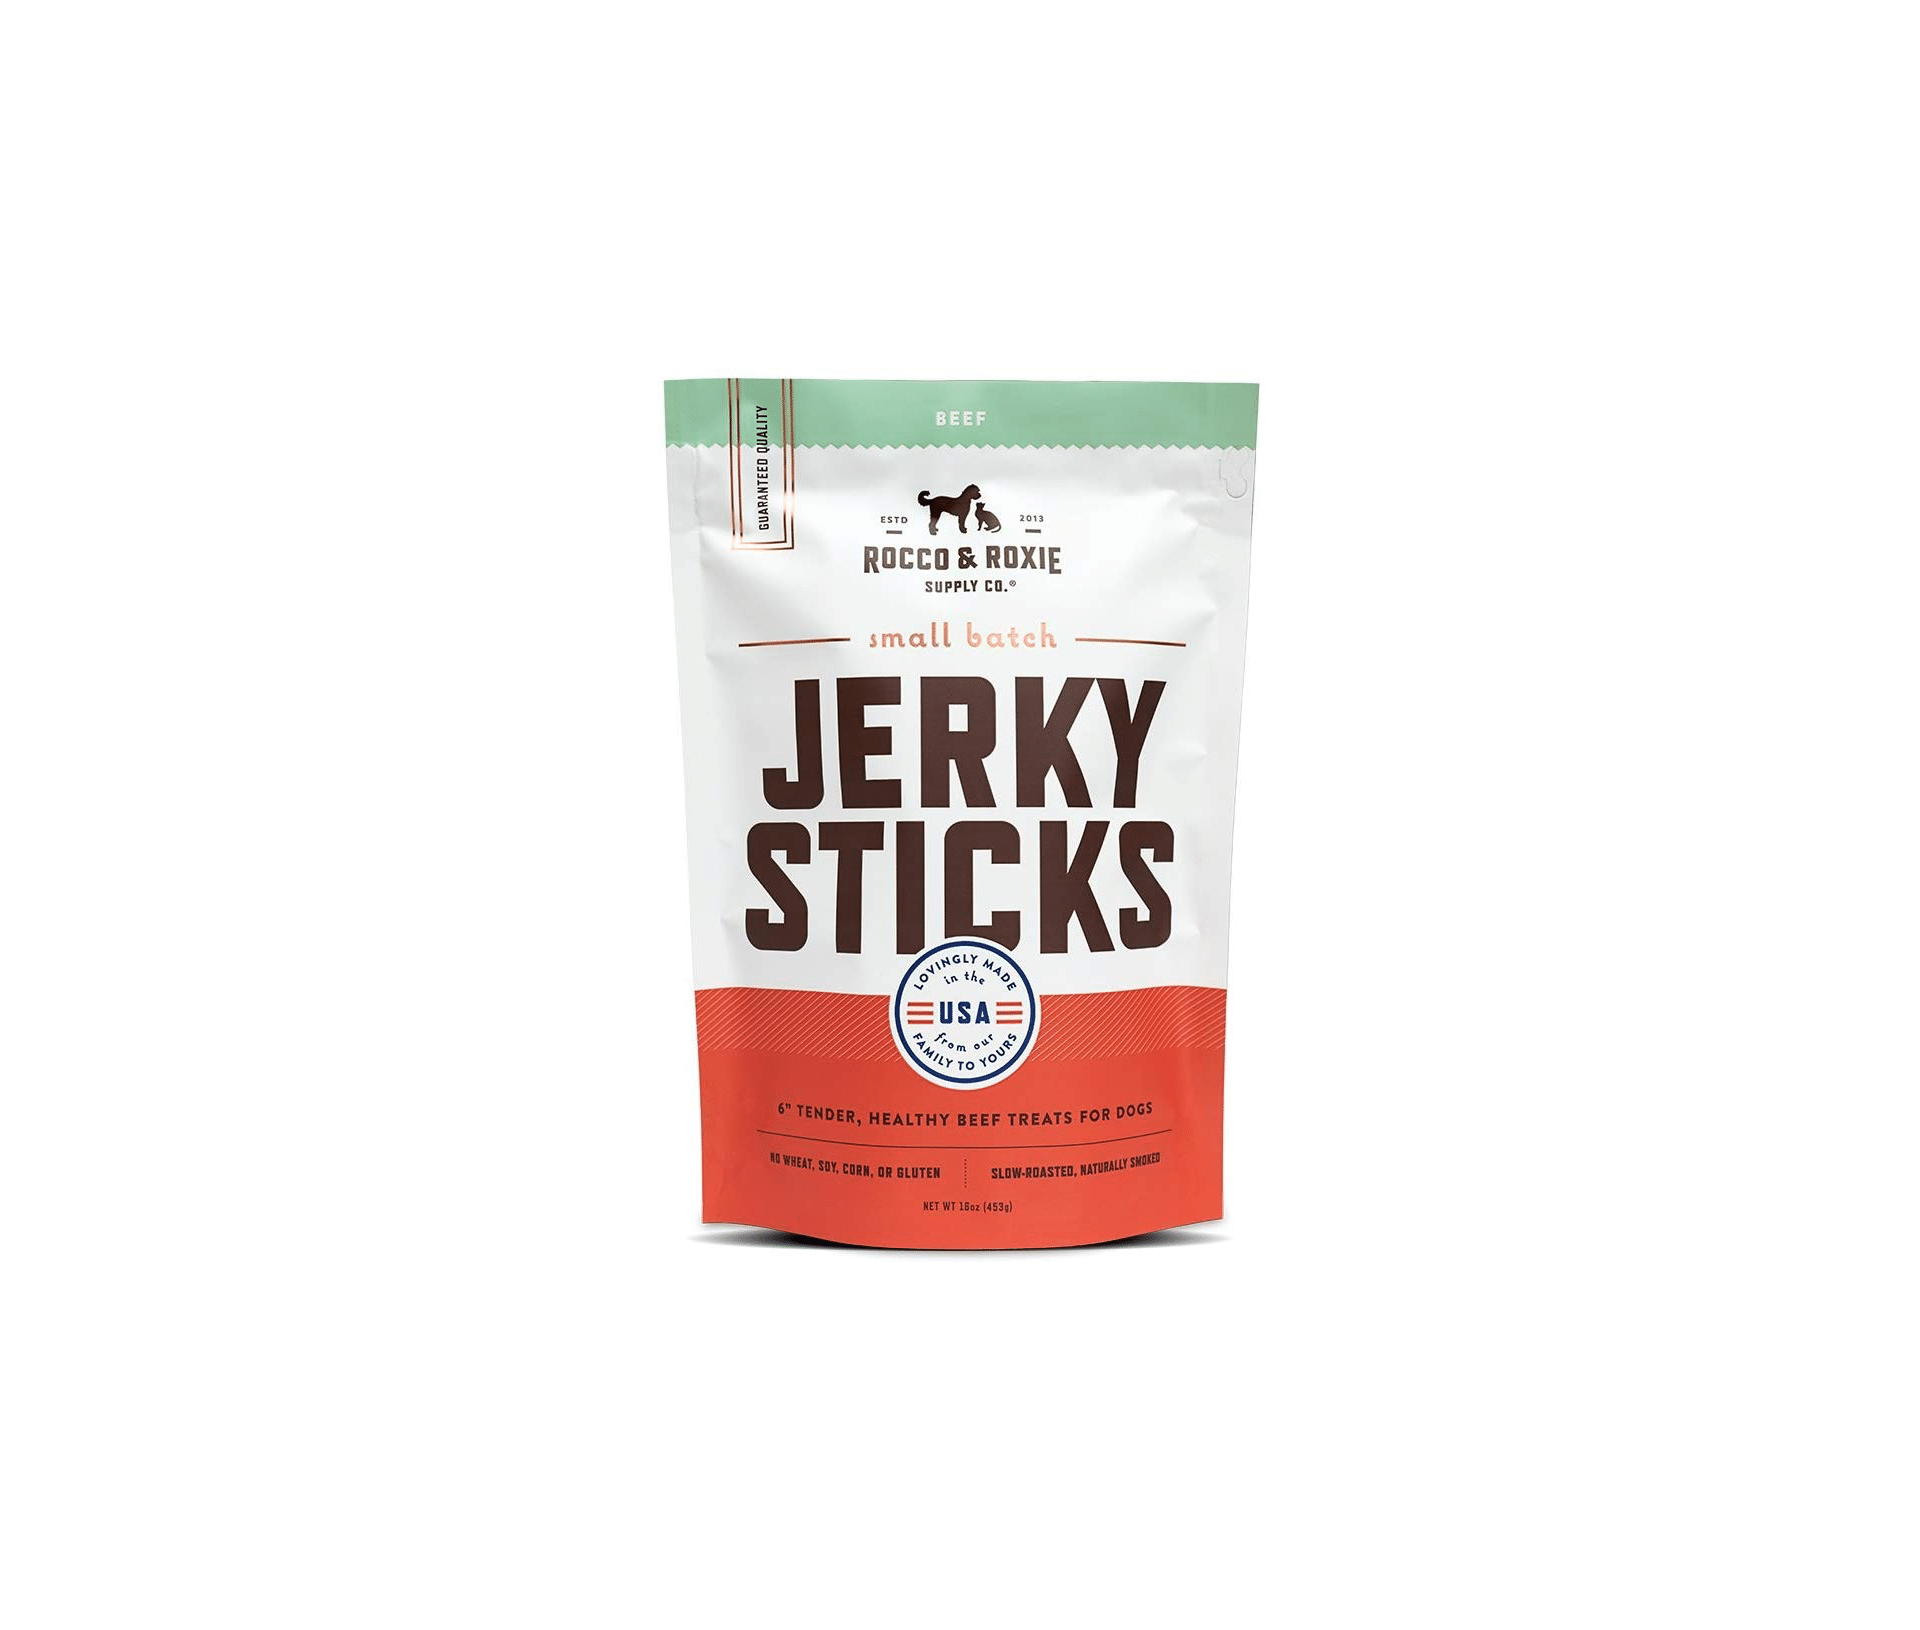 Delicious Choose Beef Slow Roasted Tender and Healthy 6 Jerky Sticks Treat 16 oz Rocco & Roxie Gourmet Jerky Dog Treats Made in USA Bag Chicken or Turkey 